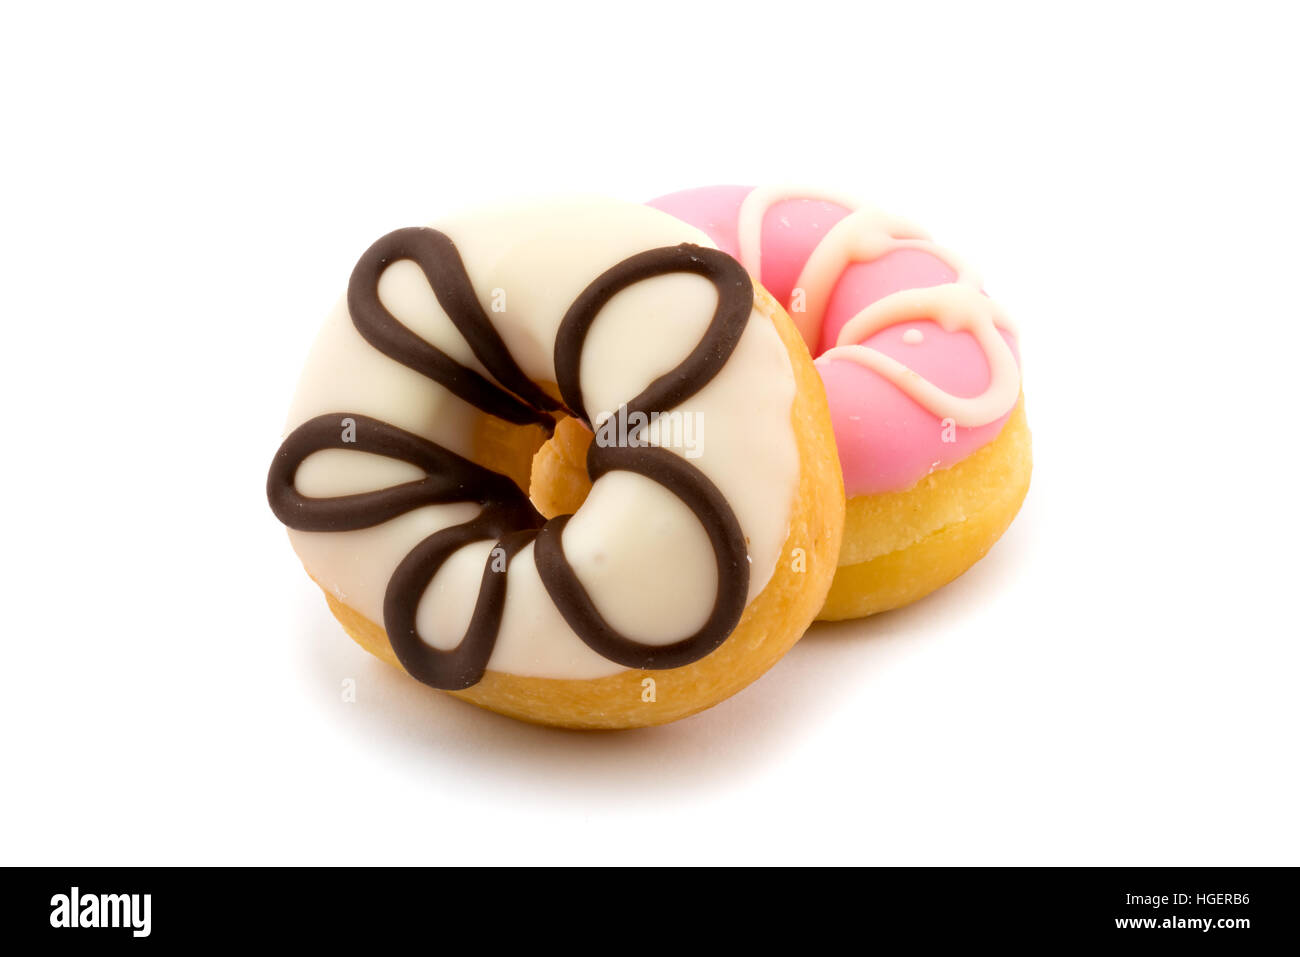 Tasty doughnuts with icing on white background Stock Photo